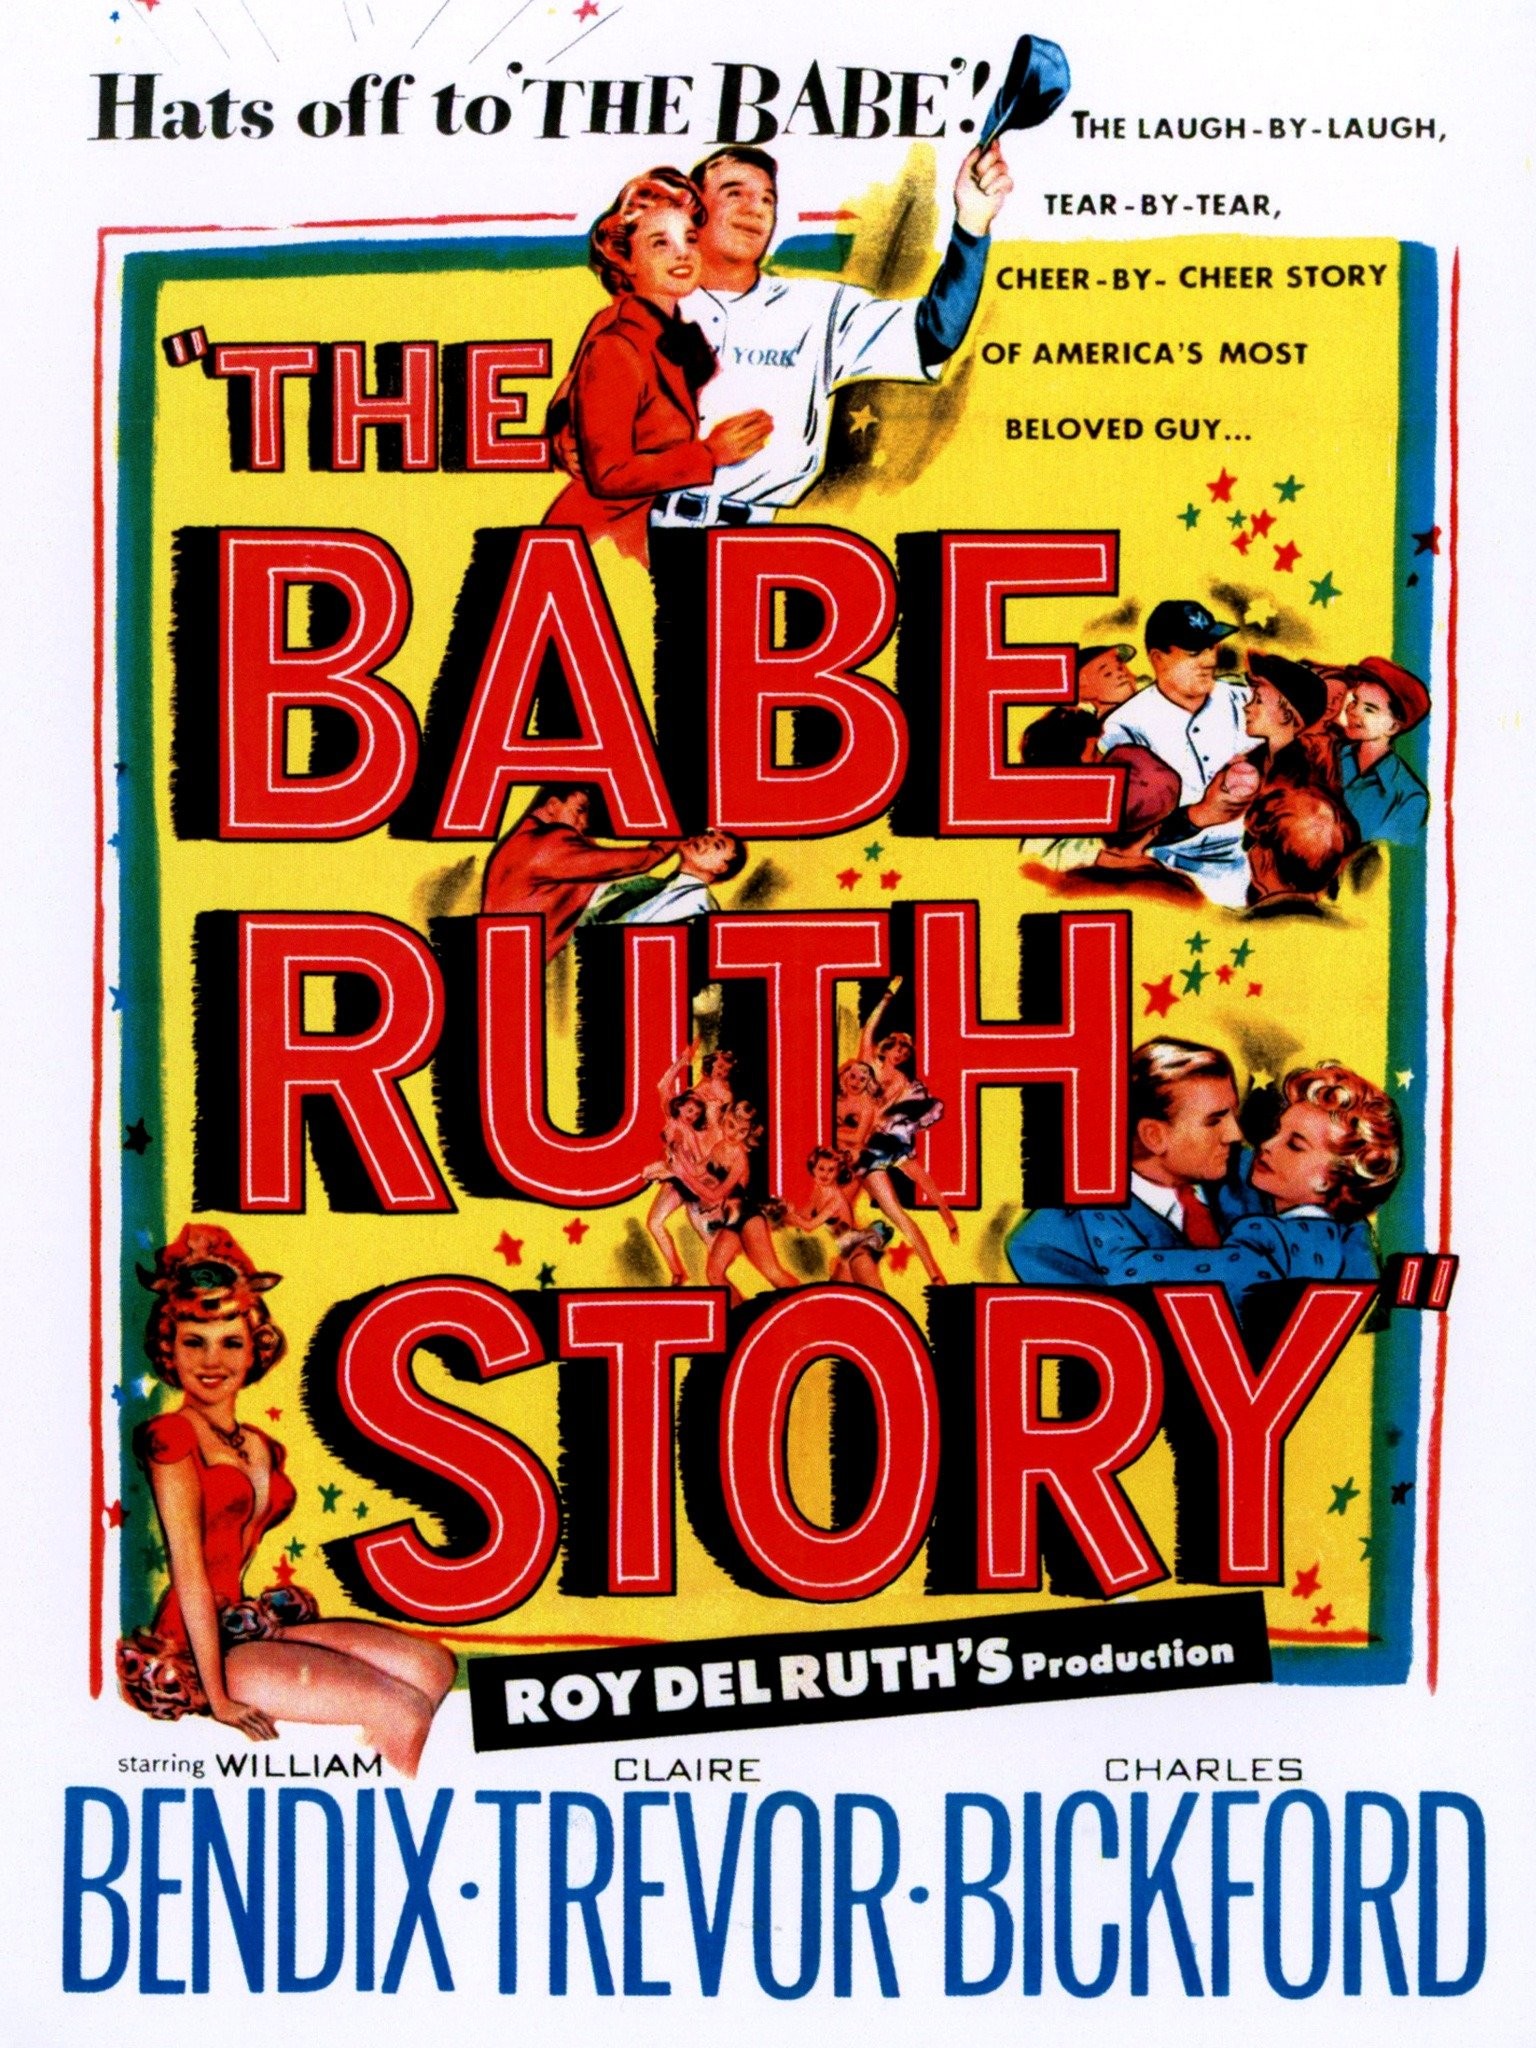 Beyond the Trivia-Babe Ruth